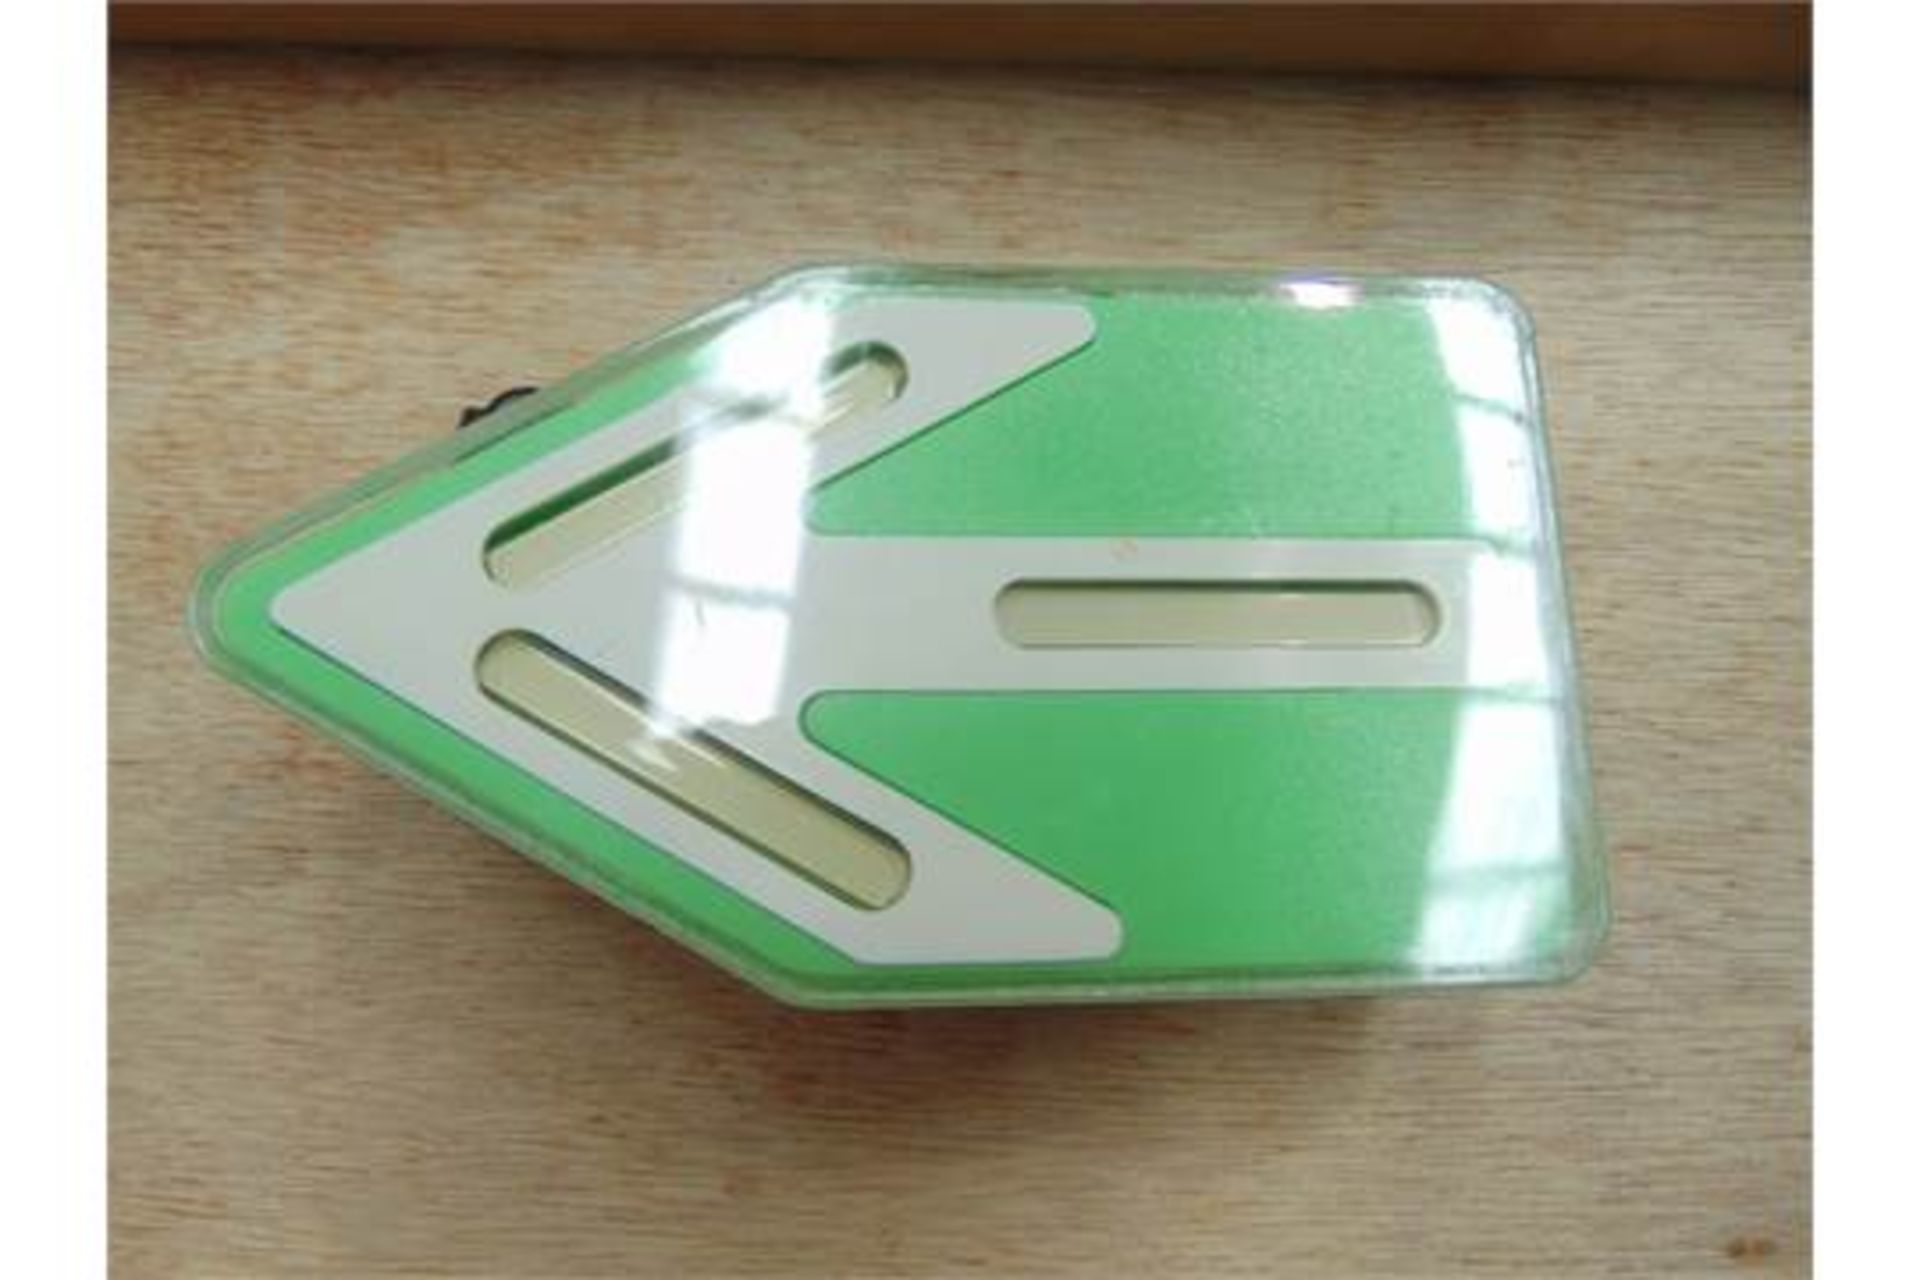 20 x Very Rare British Army Glow In The Dark Green Route Markers in Wooden Transit Case - Image 3 of 6